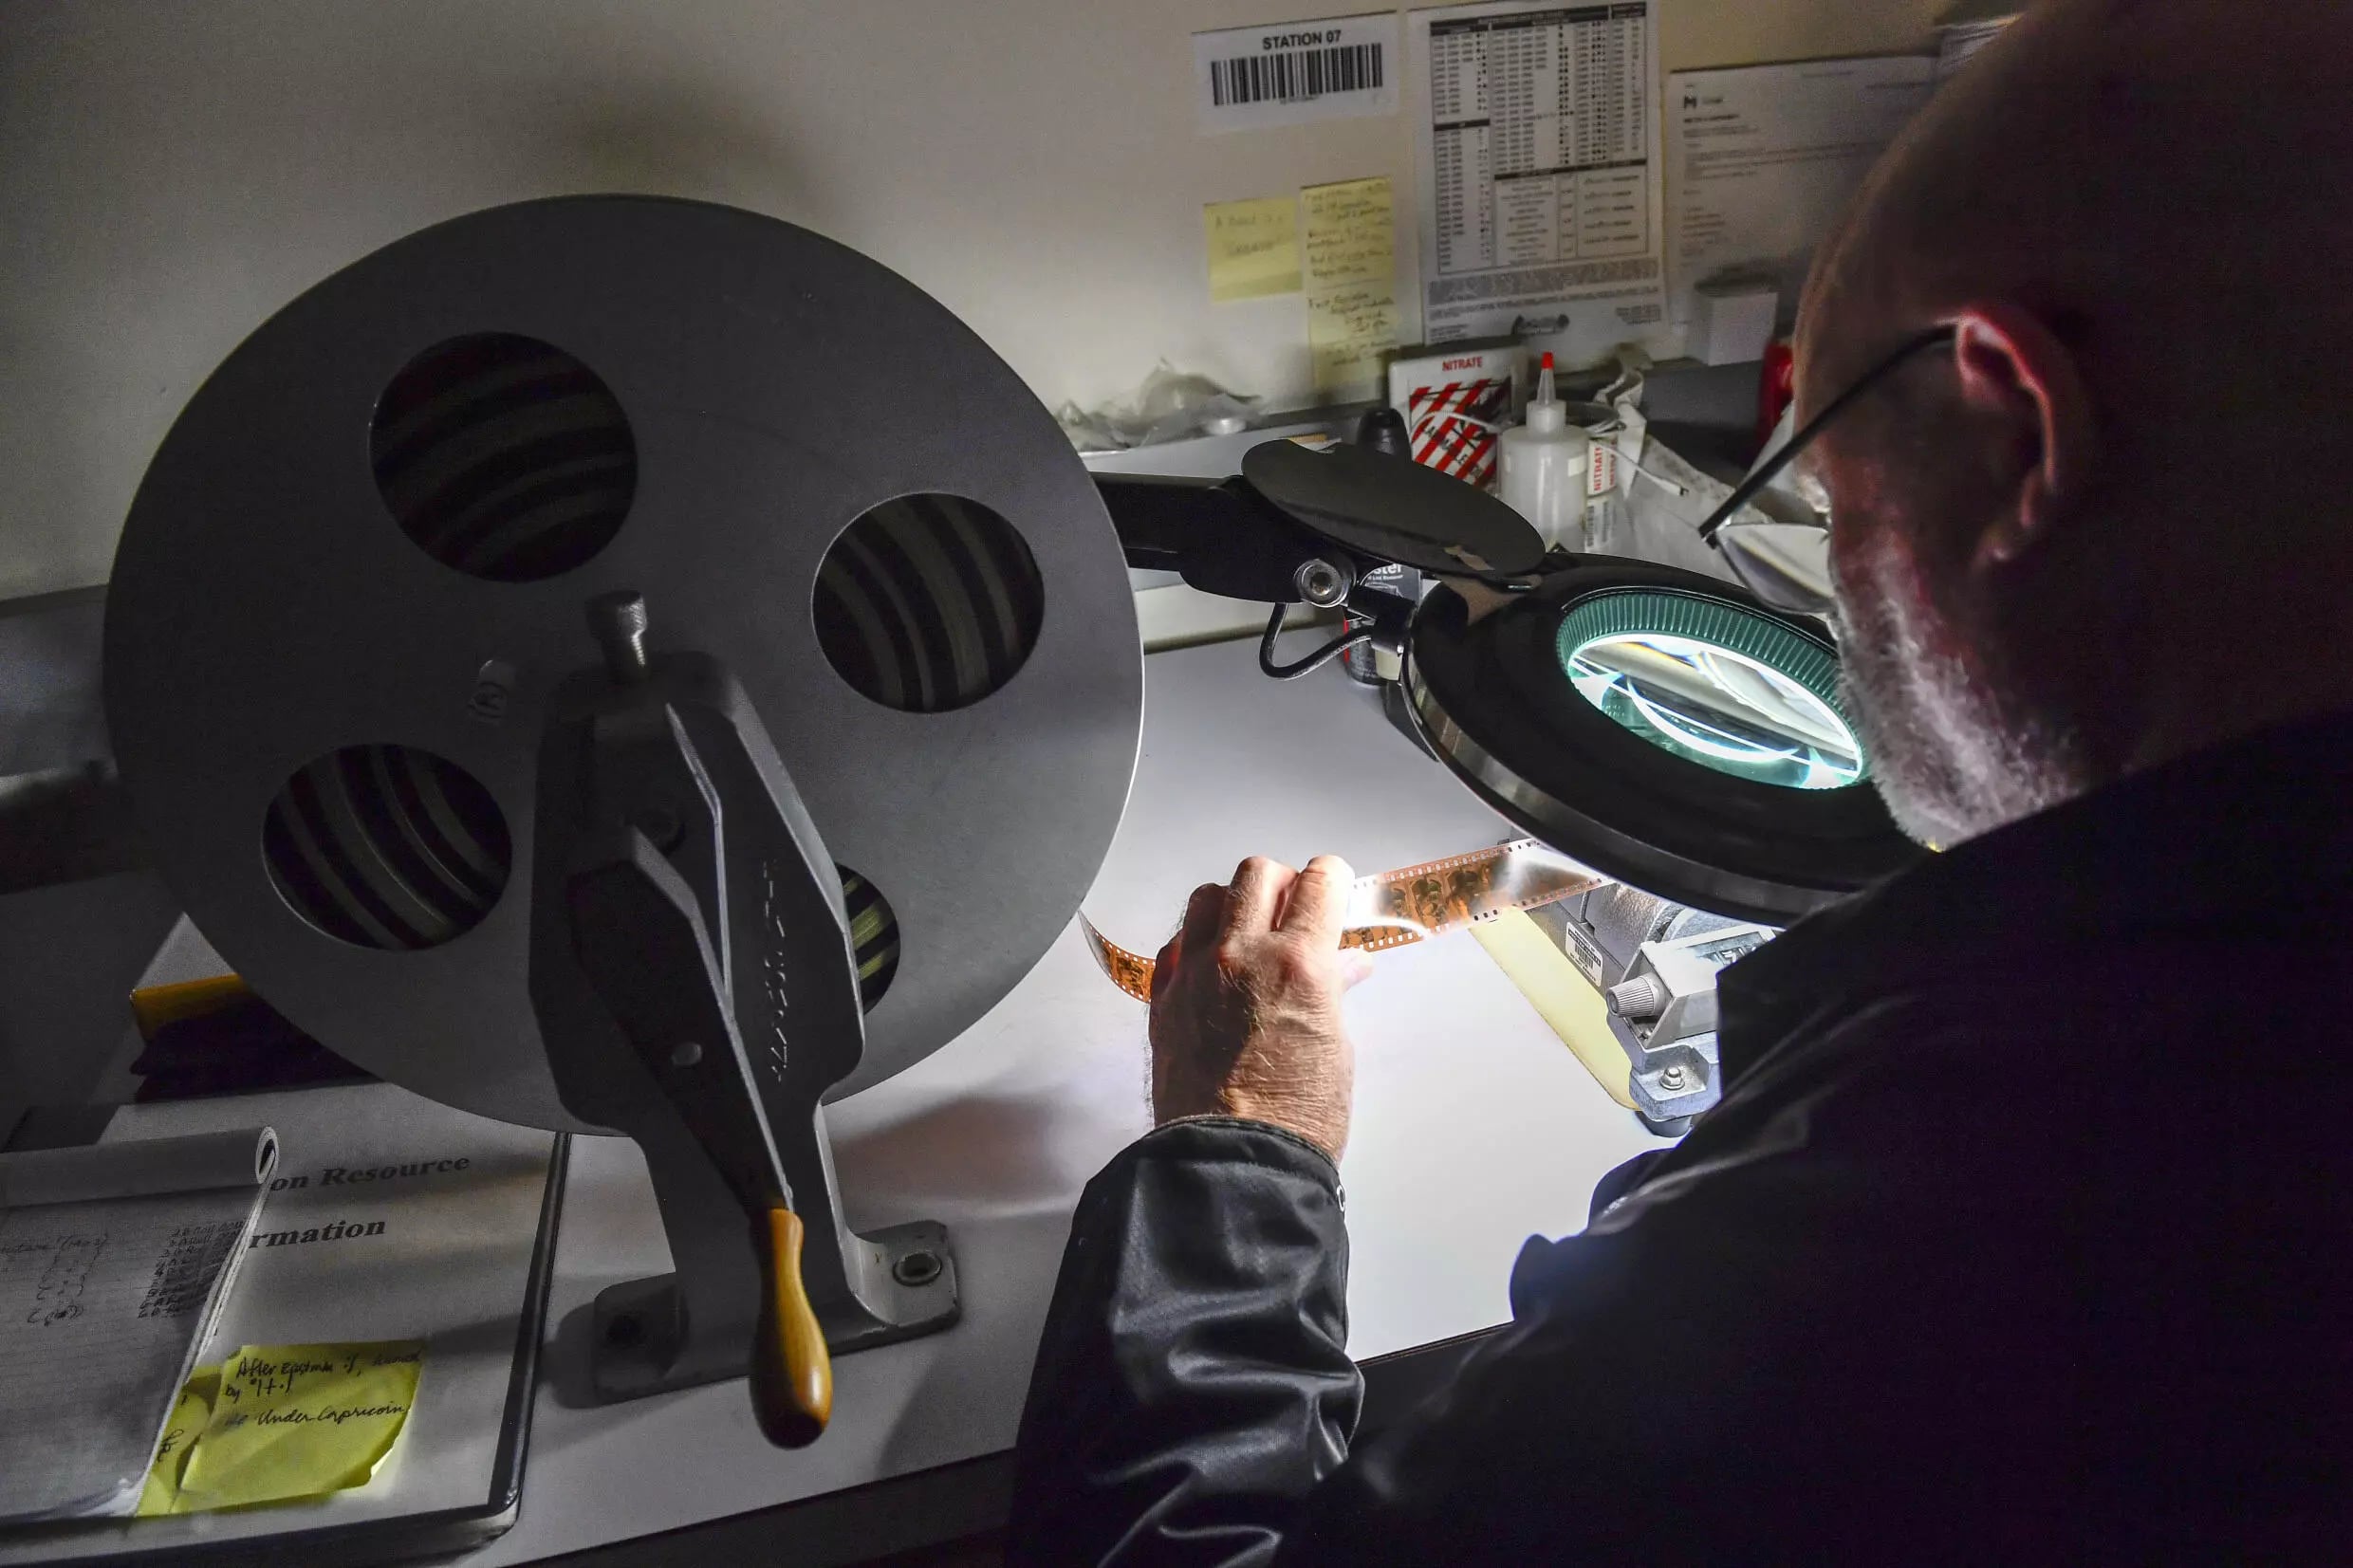 Before being stored, films have to be inspected frame by frame to ensure there is no damag. Photo: AFP